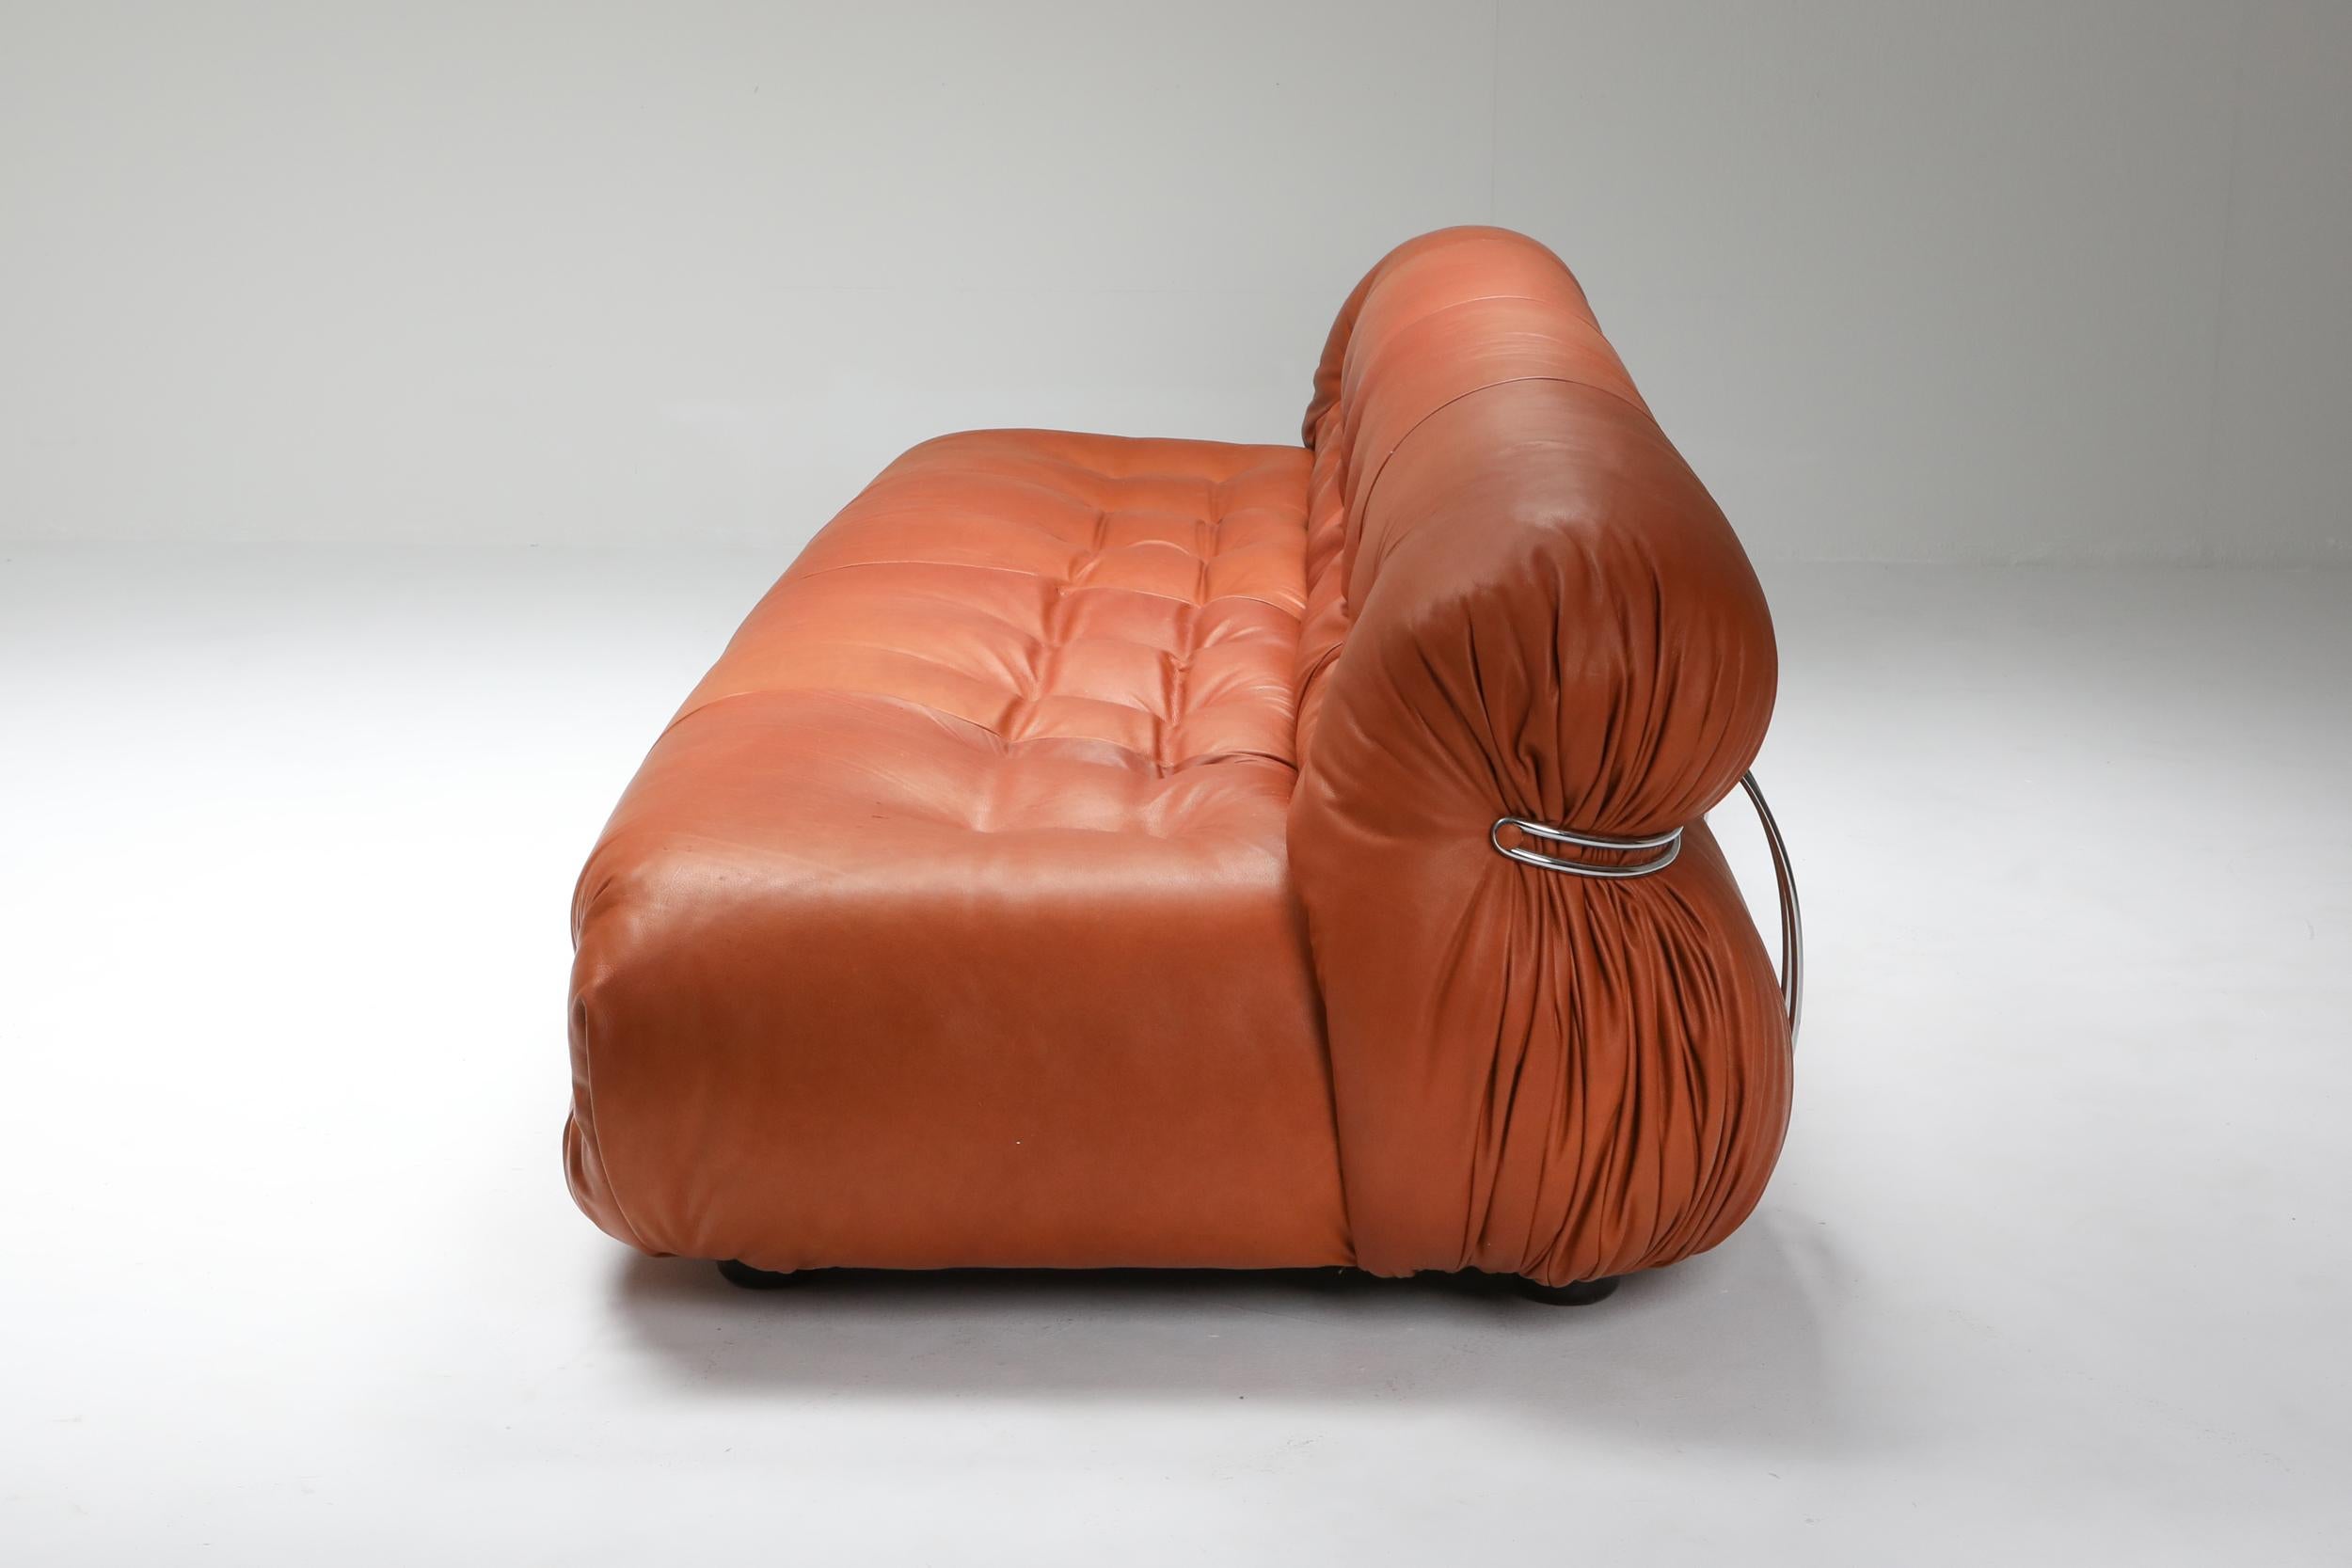 Italian Cassina 'Soriana' Cognac Leather Sofa by Afra and Tobia Scarpa, 1970s For Sale